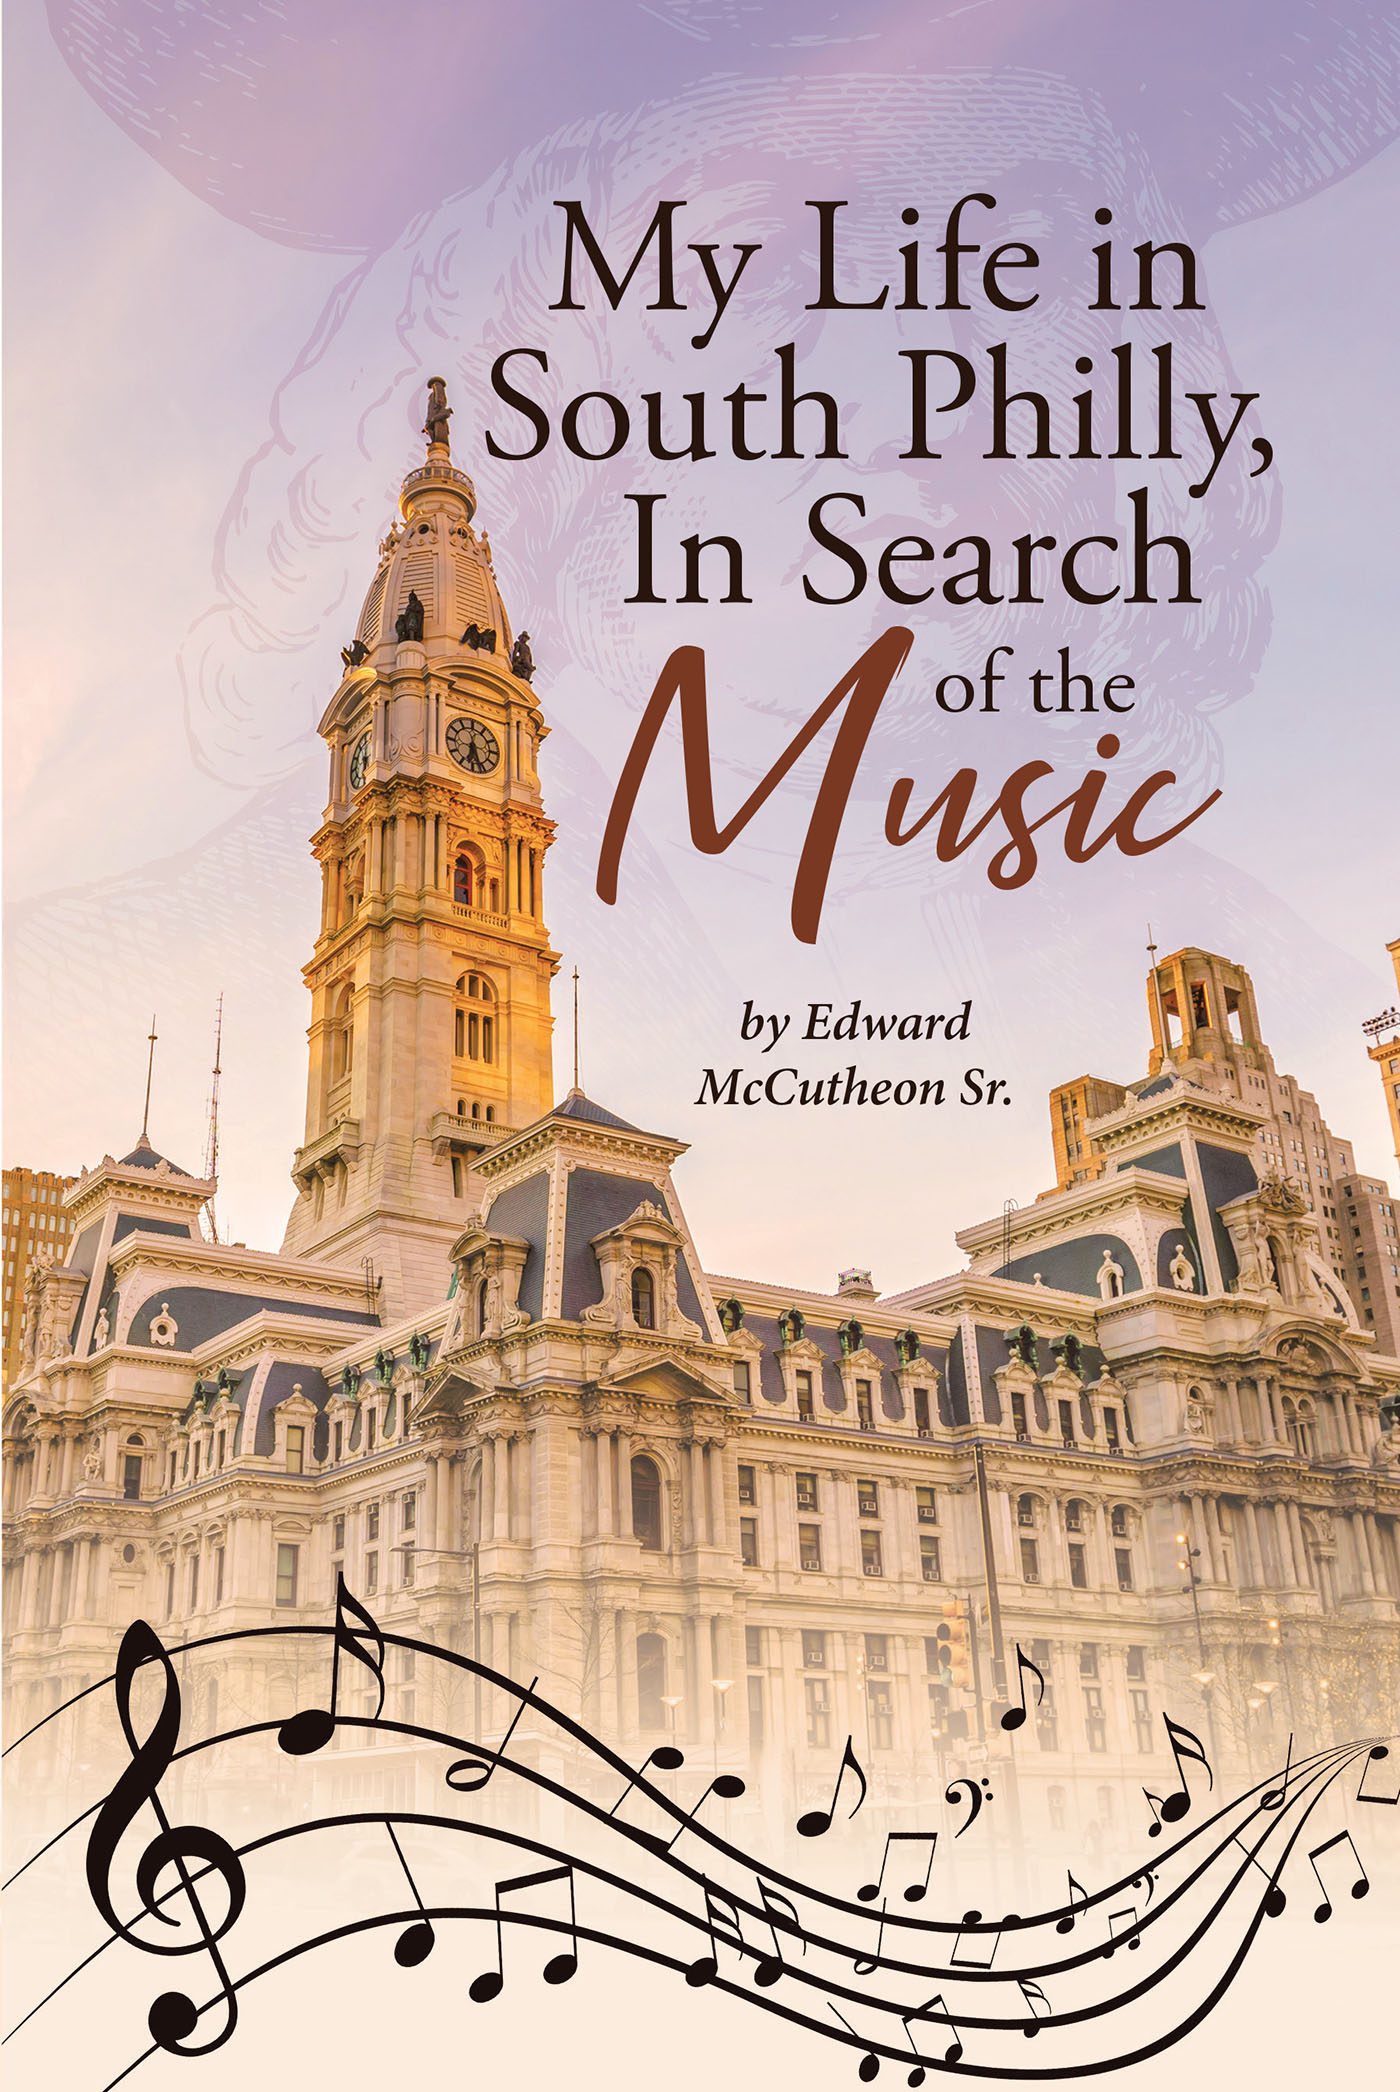 Author Edward McCutcheon, Sr.’s New Book “My Life in South Philly, In Search of the Music” is an Evocative Reflection on a Quintessentially American Life in a Bygone Era